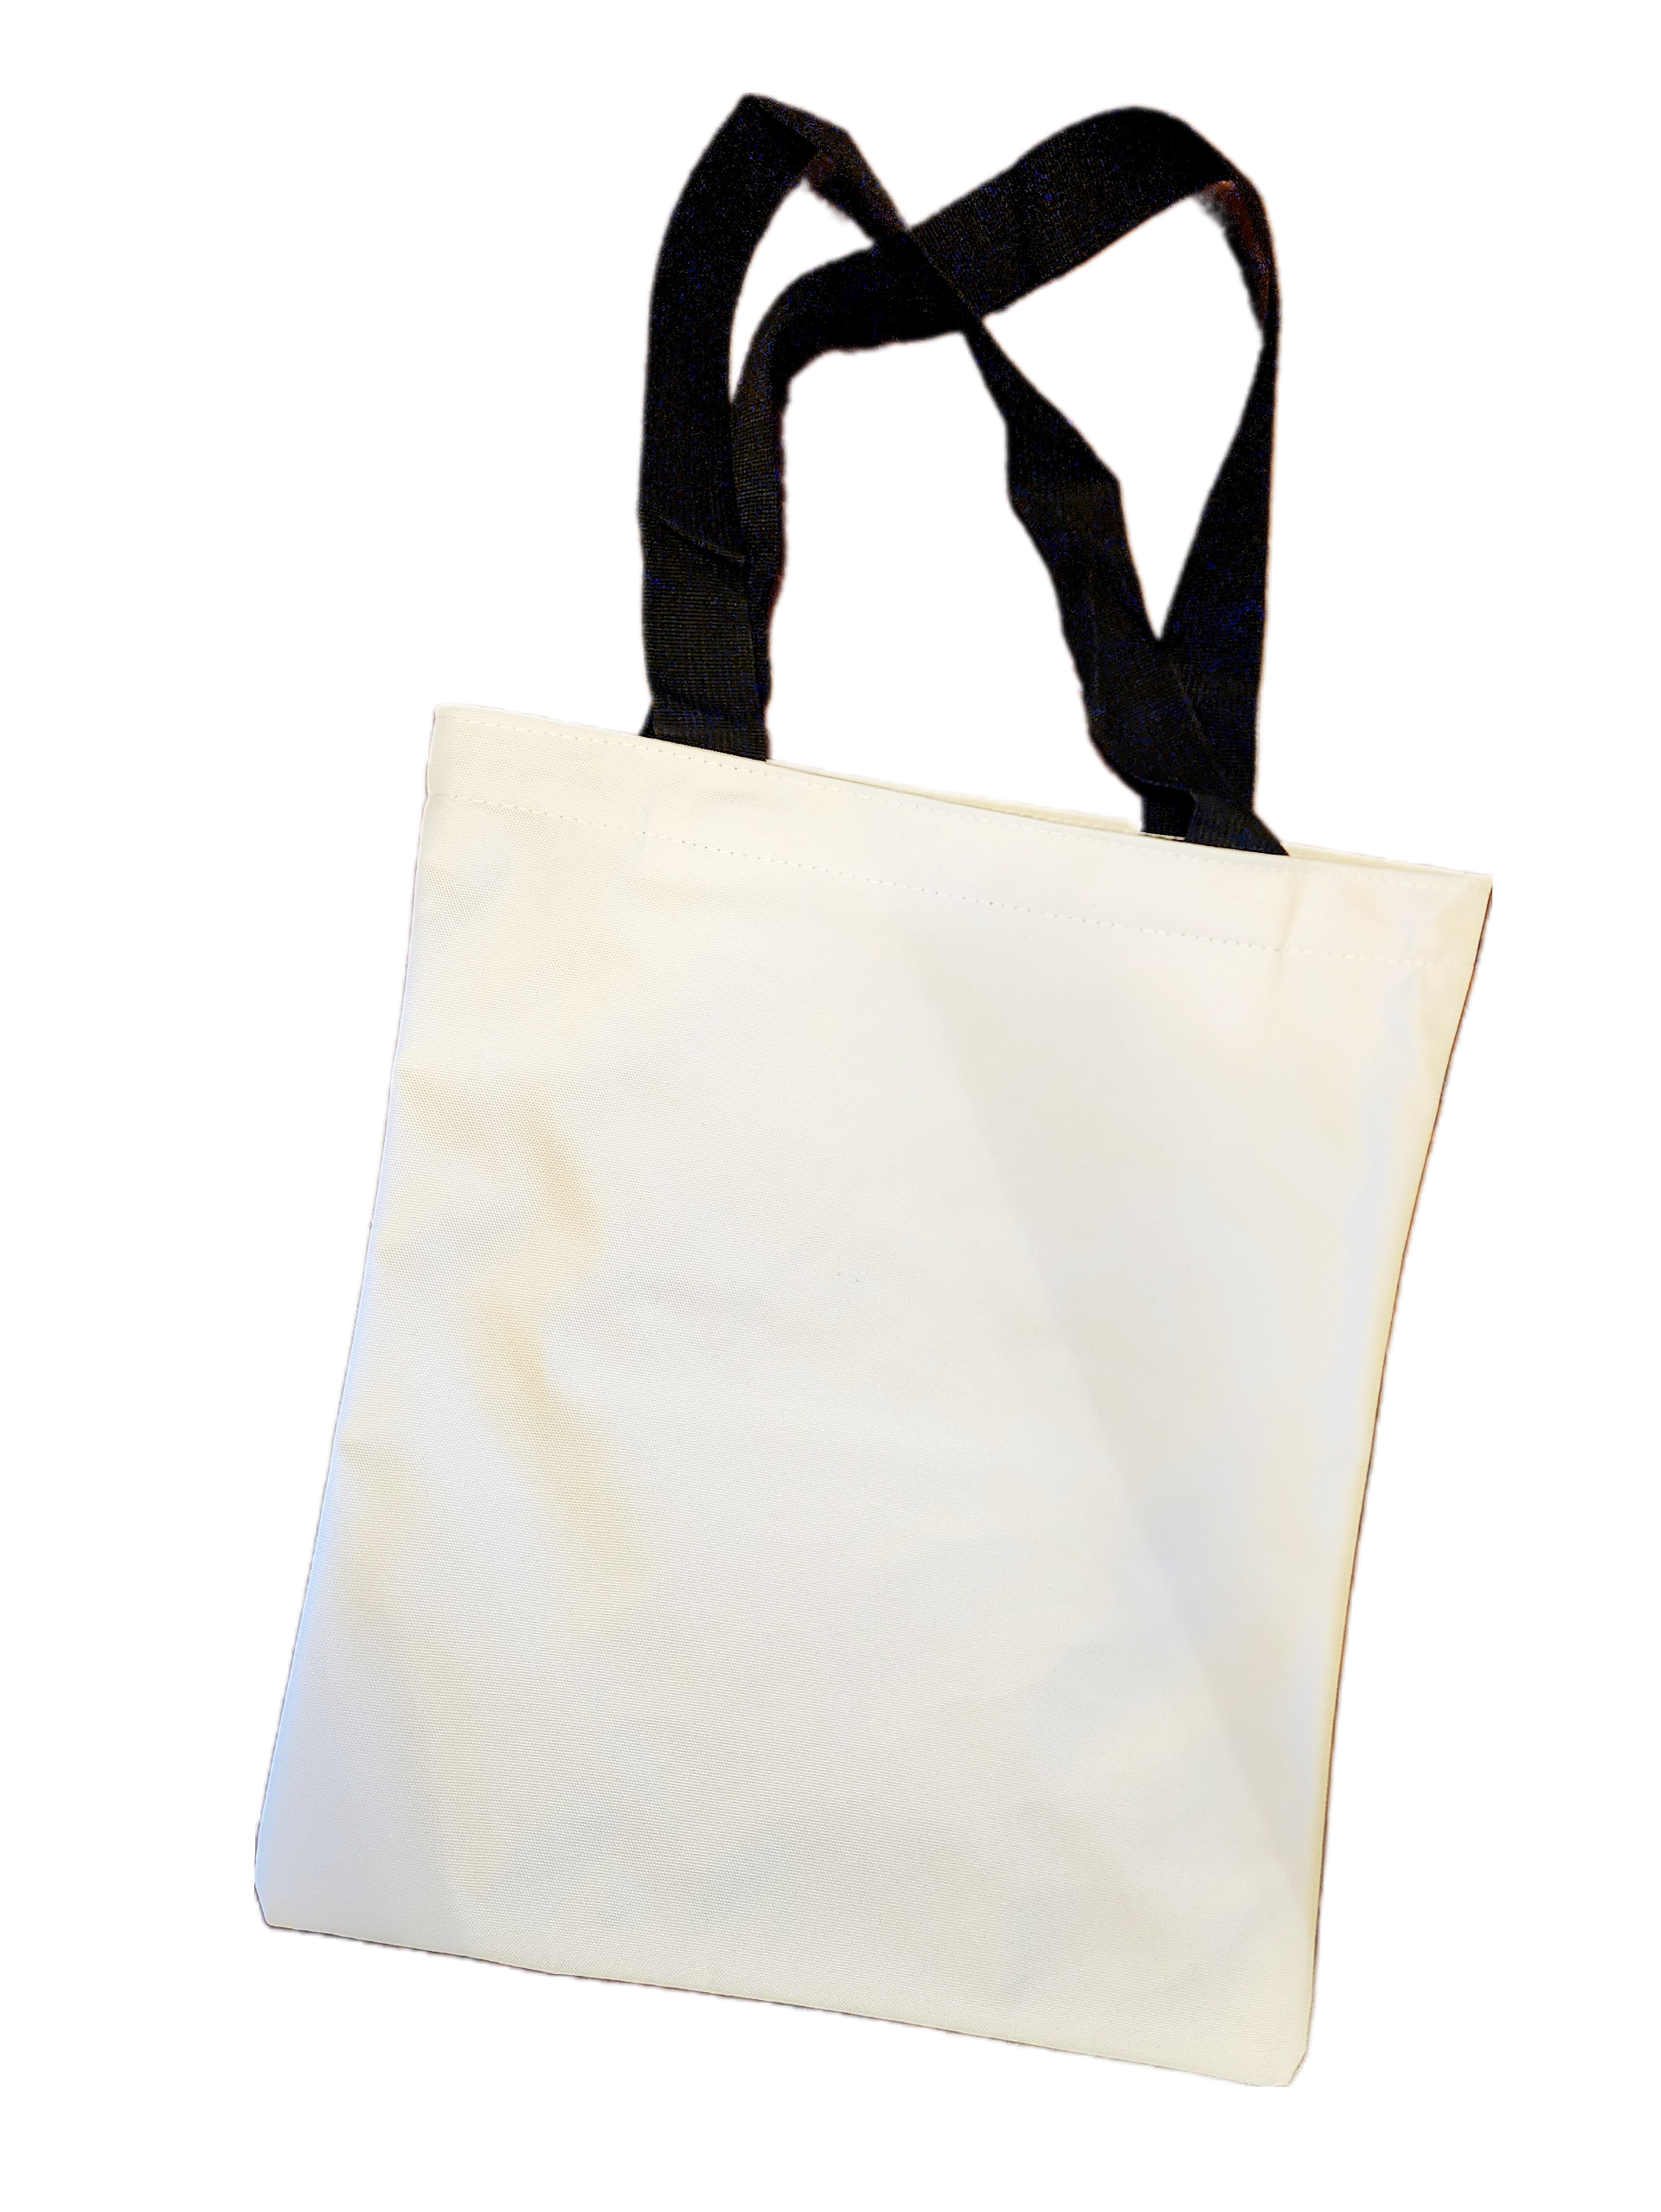 BLANK Sublimation Tote Bag,16 White,100% Polyester Tote Bag,sublimation  blanks,sublimation blank,Sublimation Bag,Sublimation Ready,Tote Bag